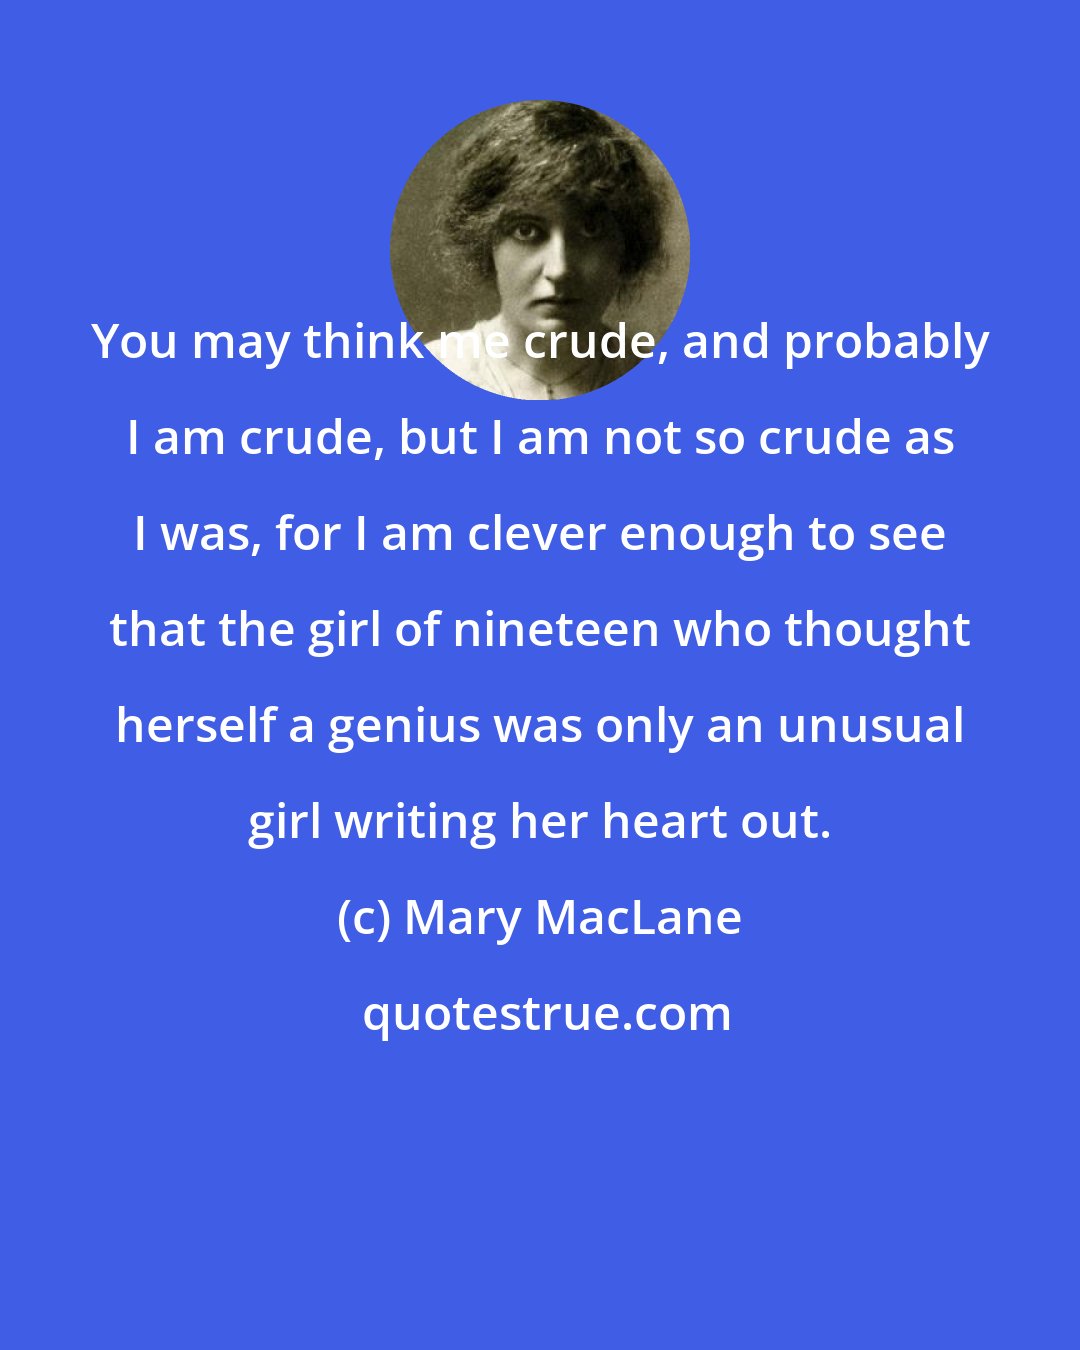 Mary MacLane: You may think me crude, and probably I am crude, but I am not so crude as I was, for I am clever enough to see that the girl of nineteen who thought herself a genius was only an unusual girl writing her heart out.